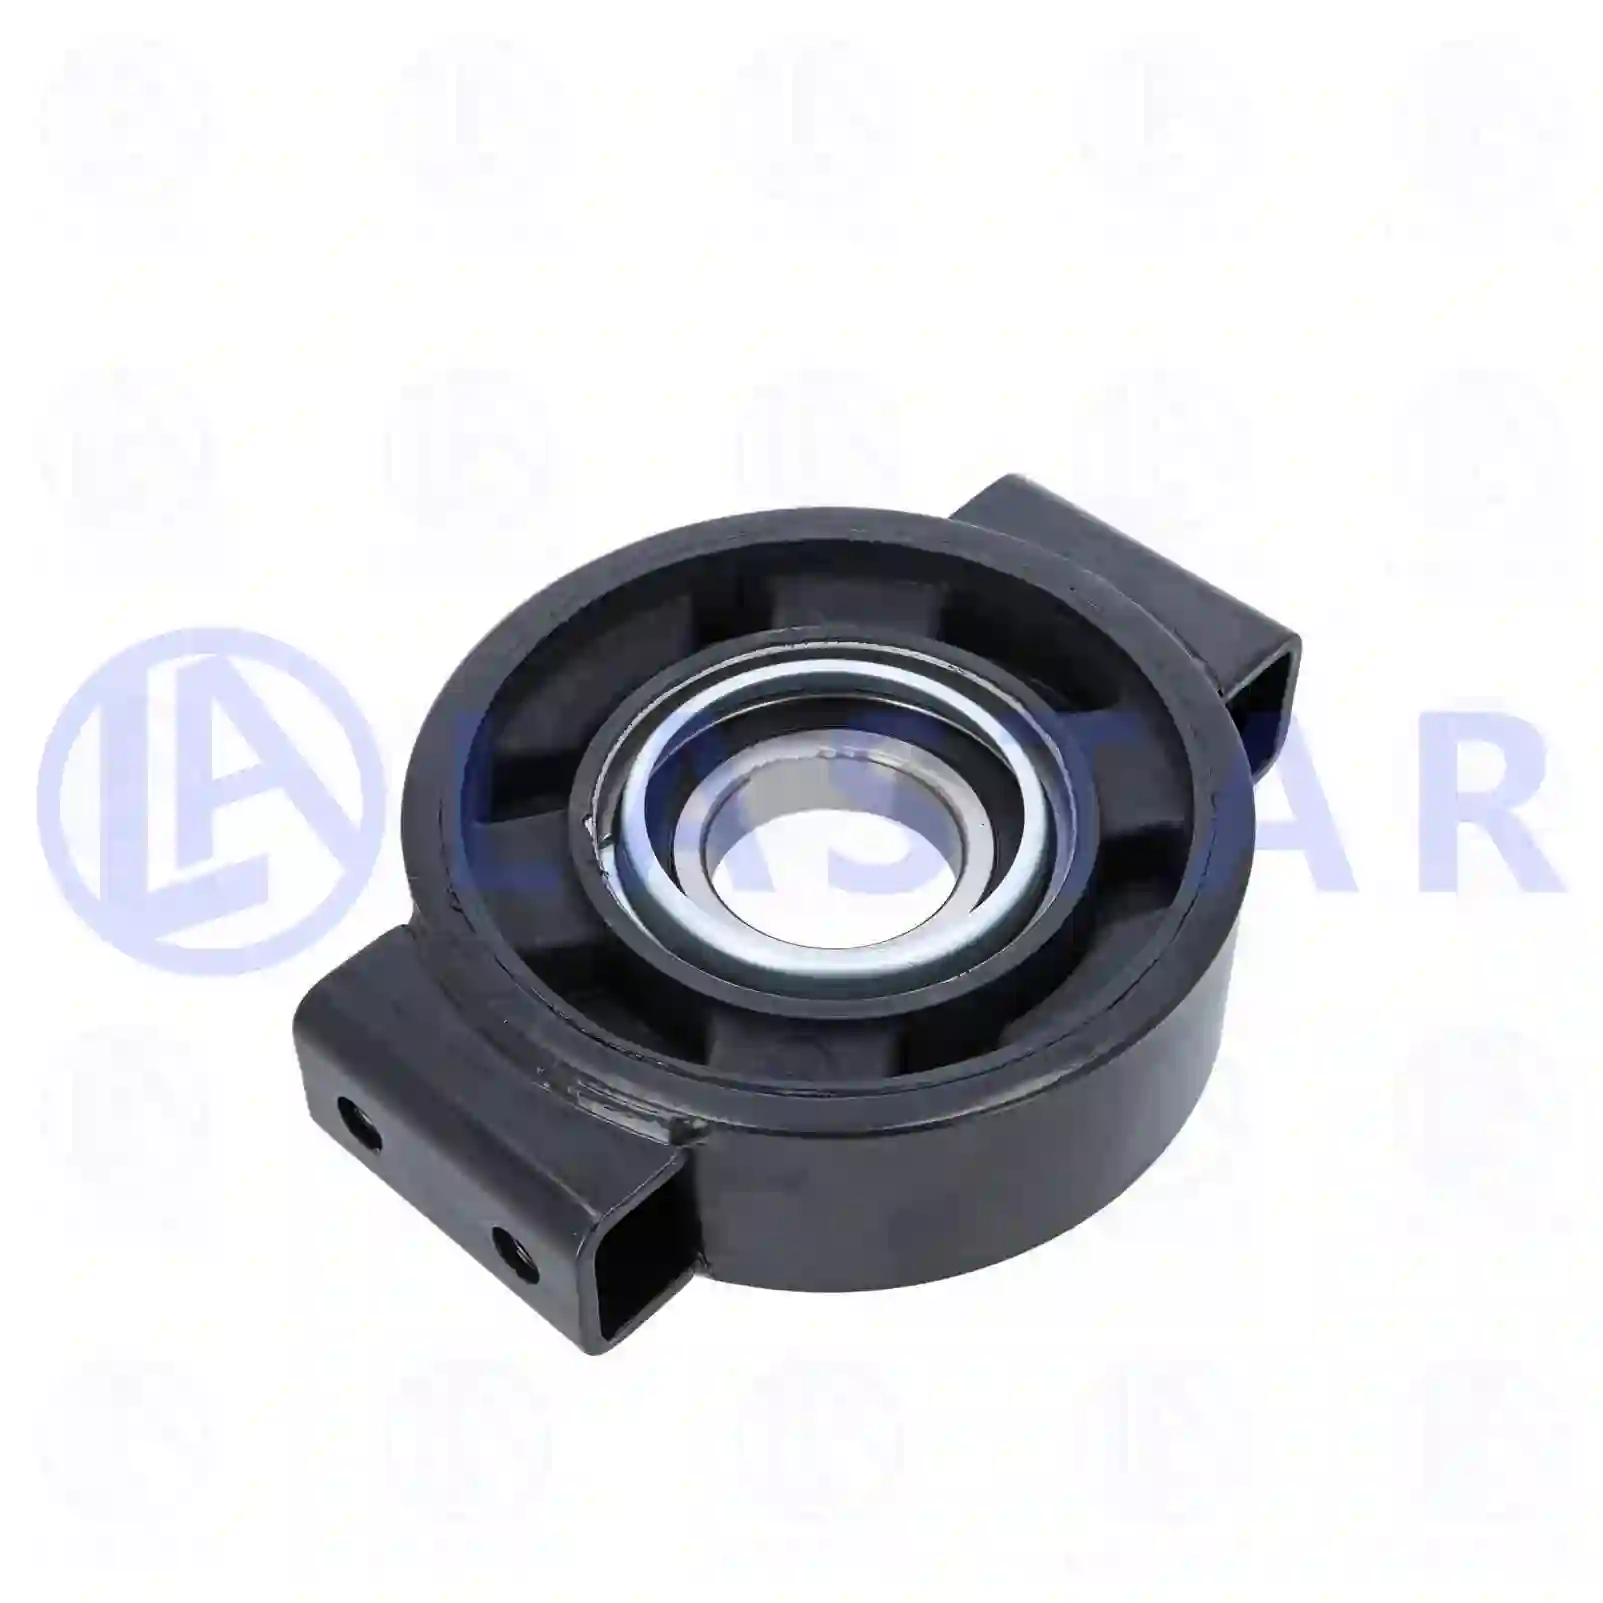 Support Bearing Center bearing, la no: 77734254 ,  oem no:3894100122, 3894100222, 6544100022, ZG02480-0008 Lastar Spare Part | Truck Spare Parts, Auotomotive Spare Parts